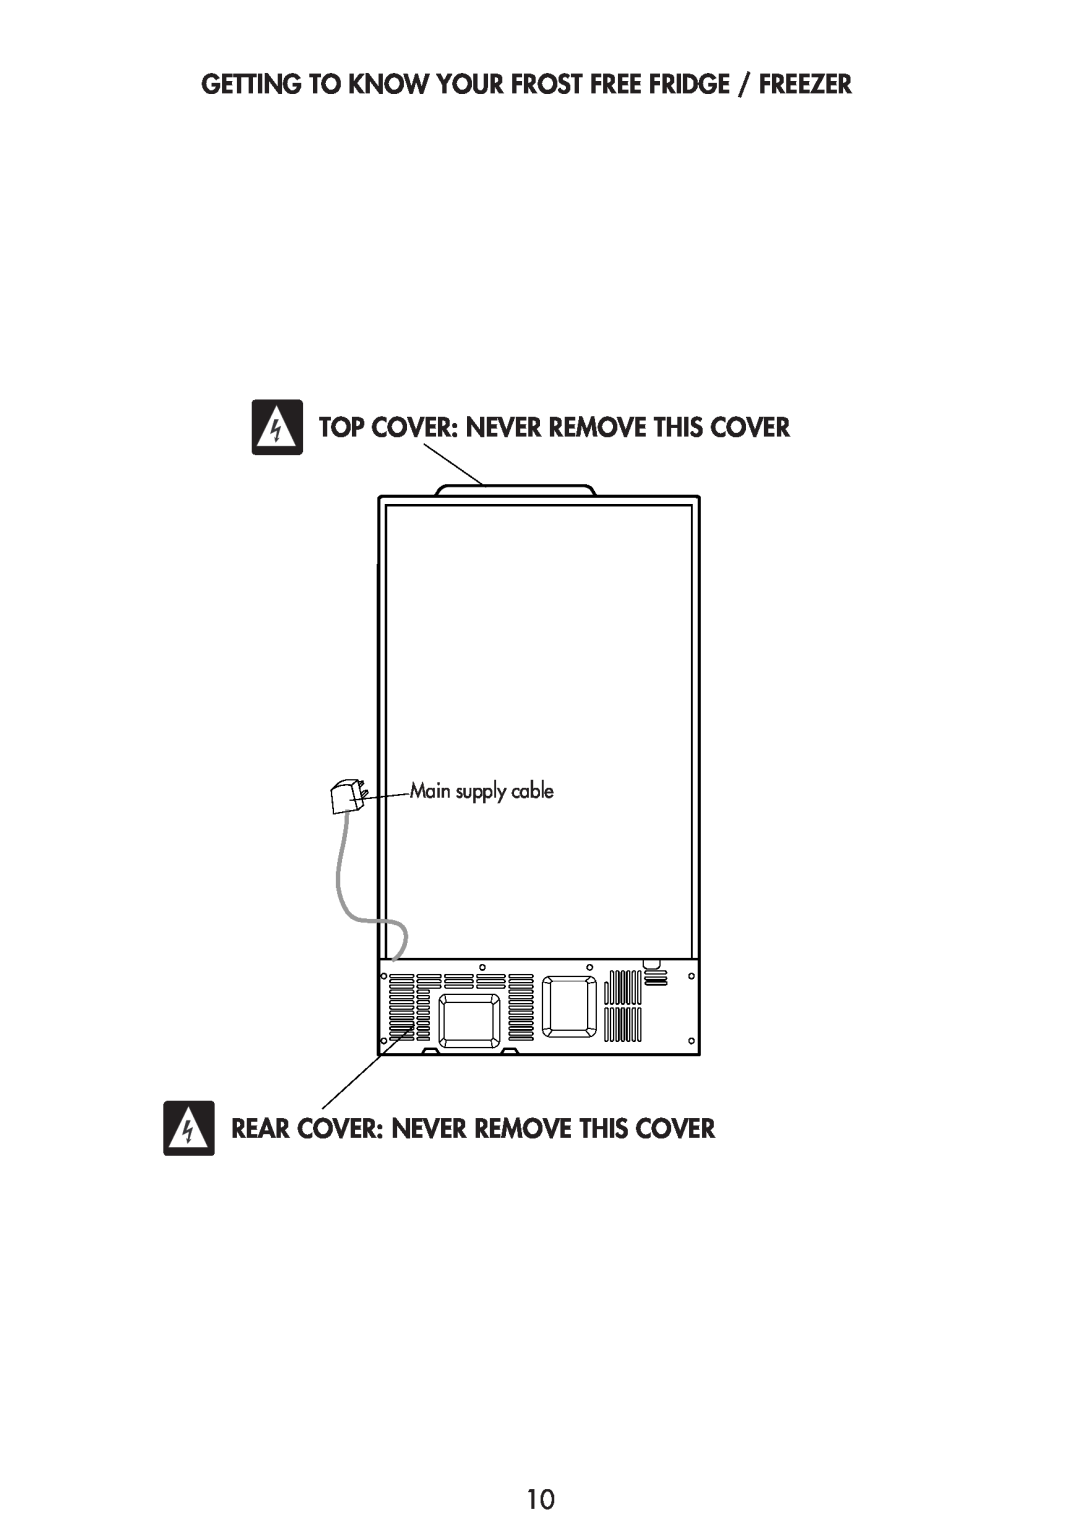 Beko GNE 114610 FX manual Top Cover: Never Remove This Cover, Rear Cover: Never Remove This Cover, Main supply cable 